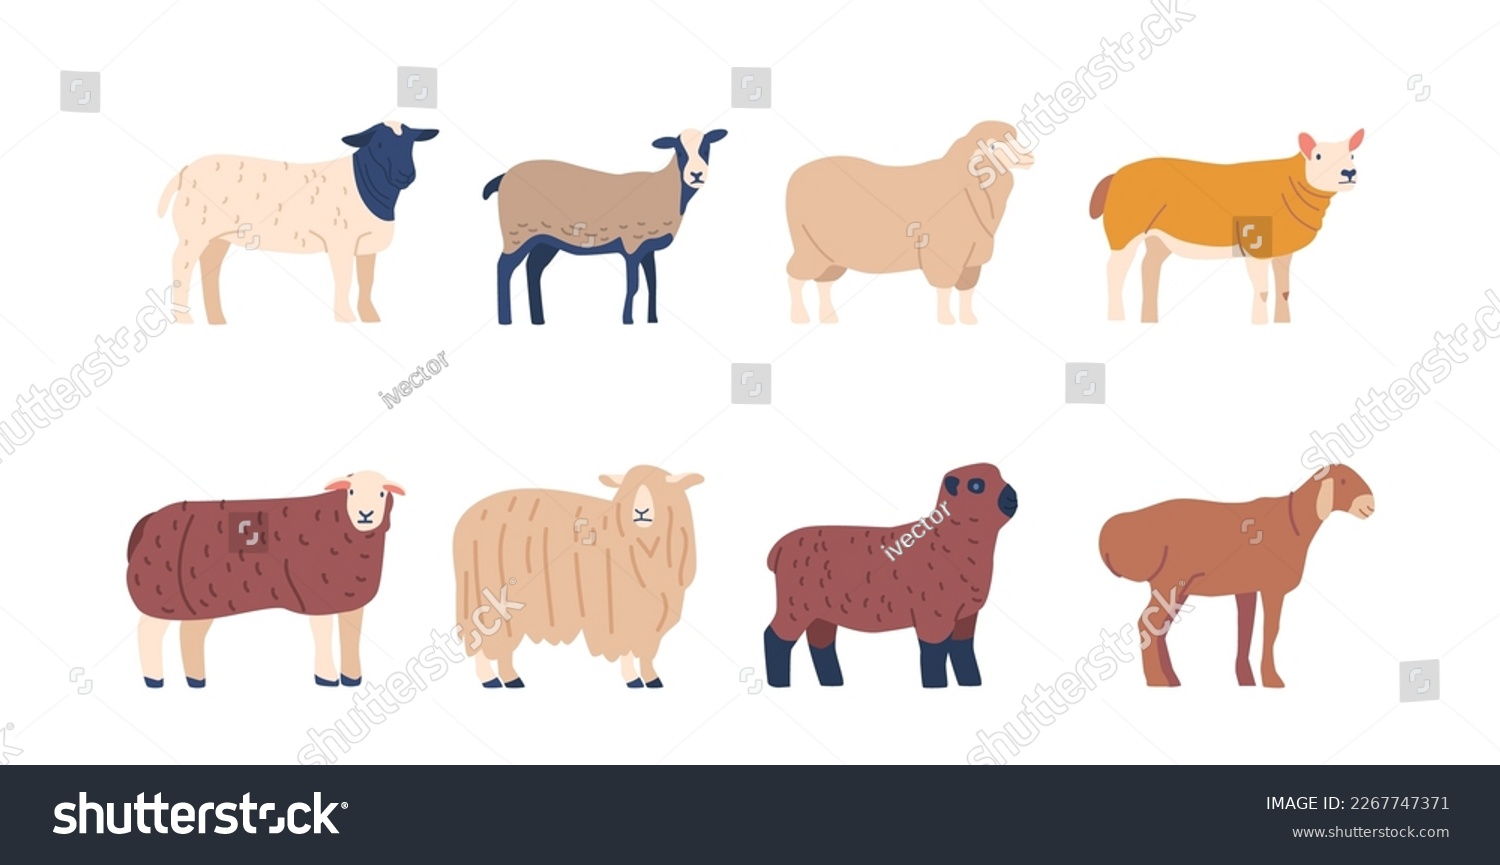 SVG of Set of Sheep Breed with Different Wool and Fur Colors, Domestic Farm Animals Bred for Wool And Meat, Husbandry, Agriculture, Farming, Or Animal Livestock. Cartoon Vector Illustration svg